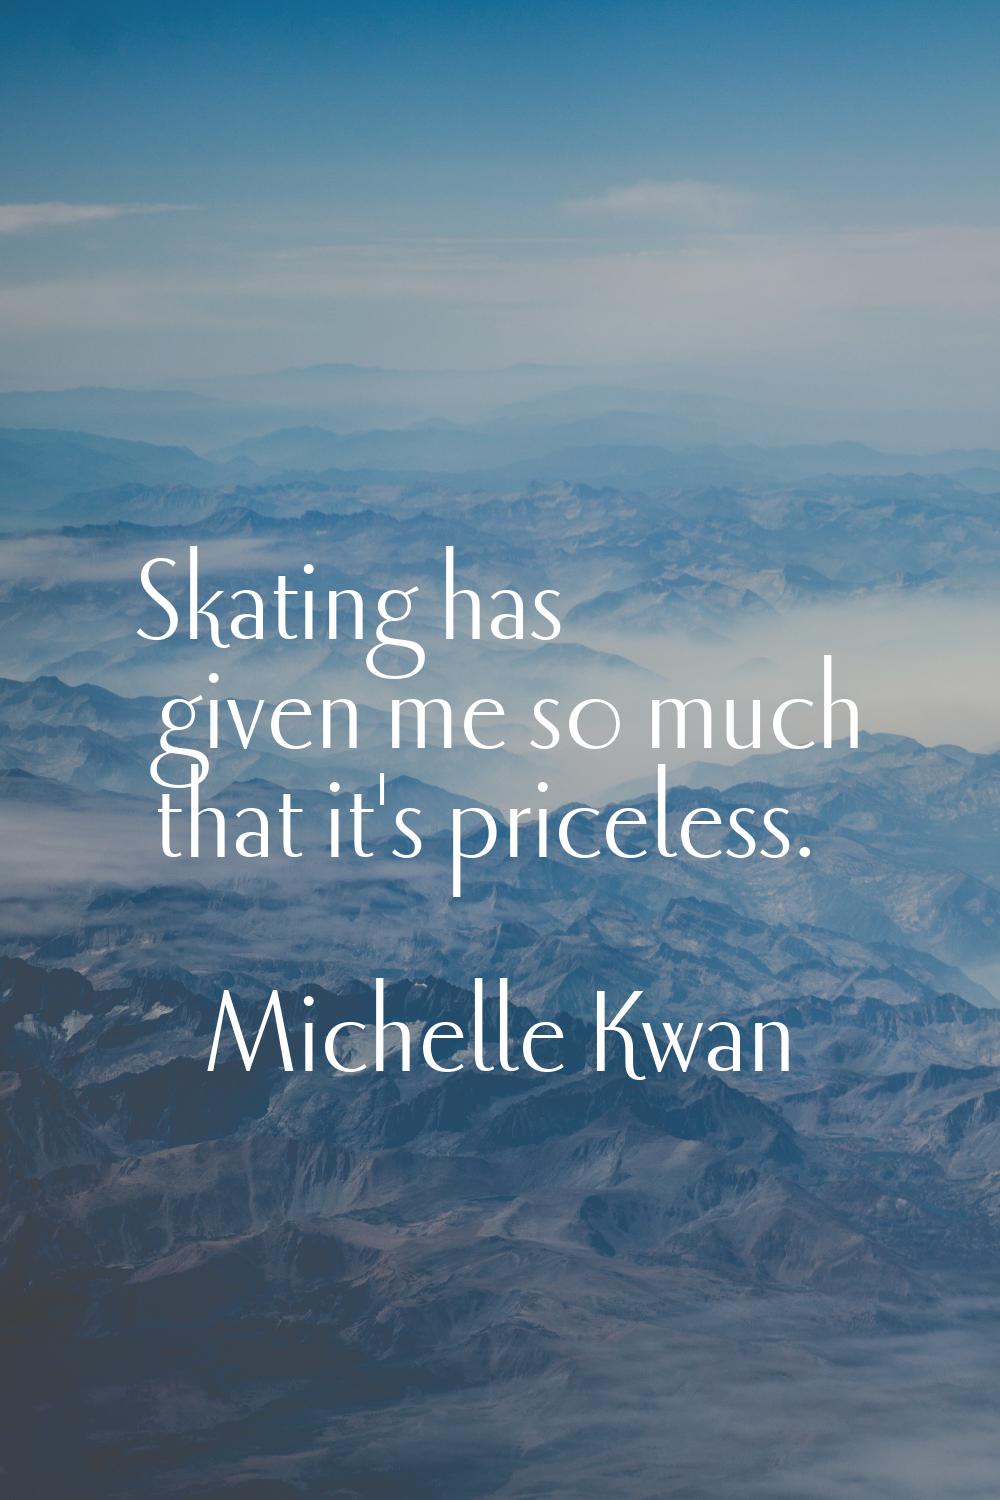 Skating has given me so much that it's priceless.